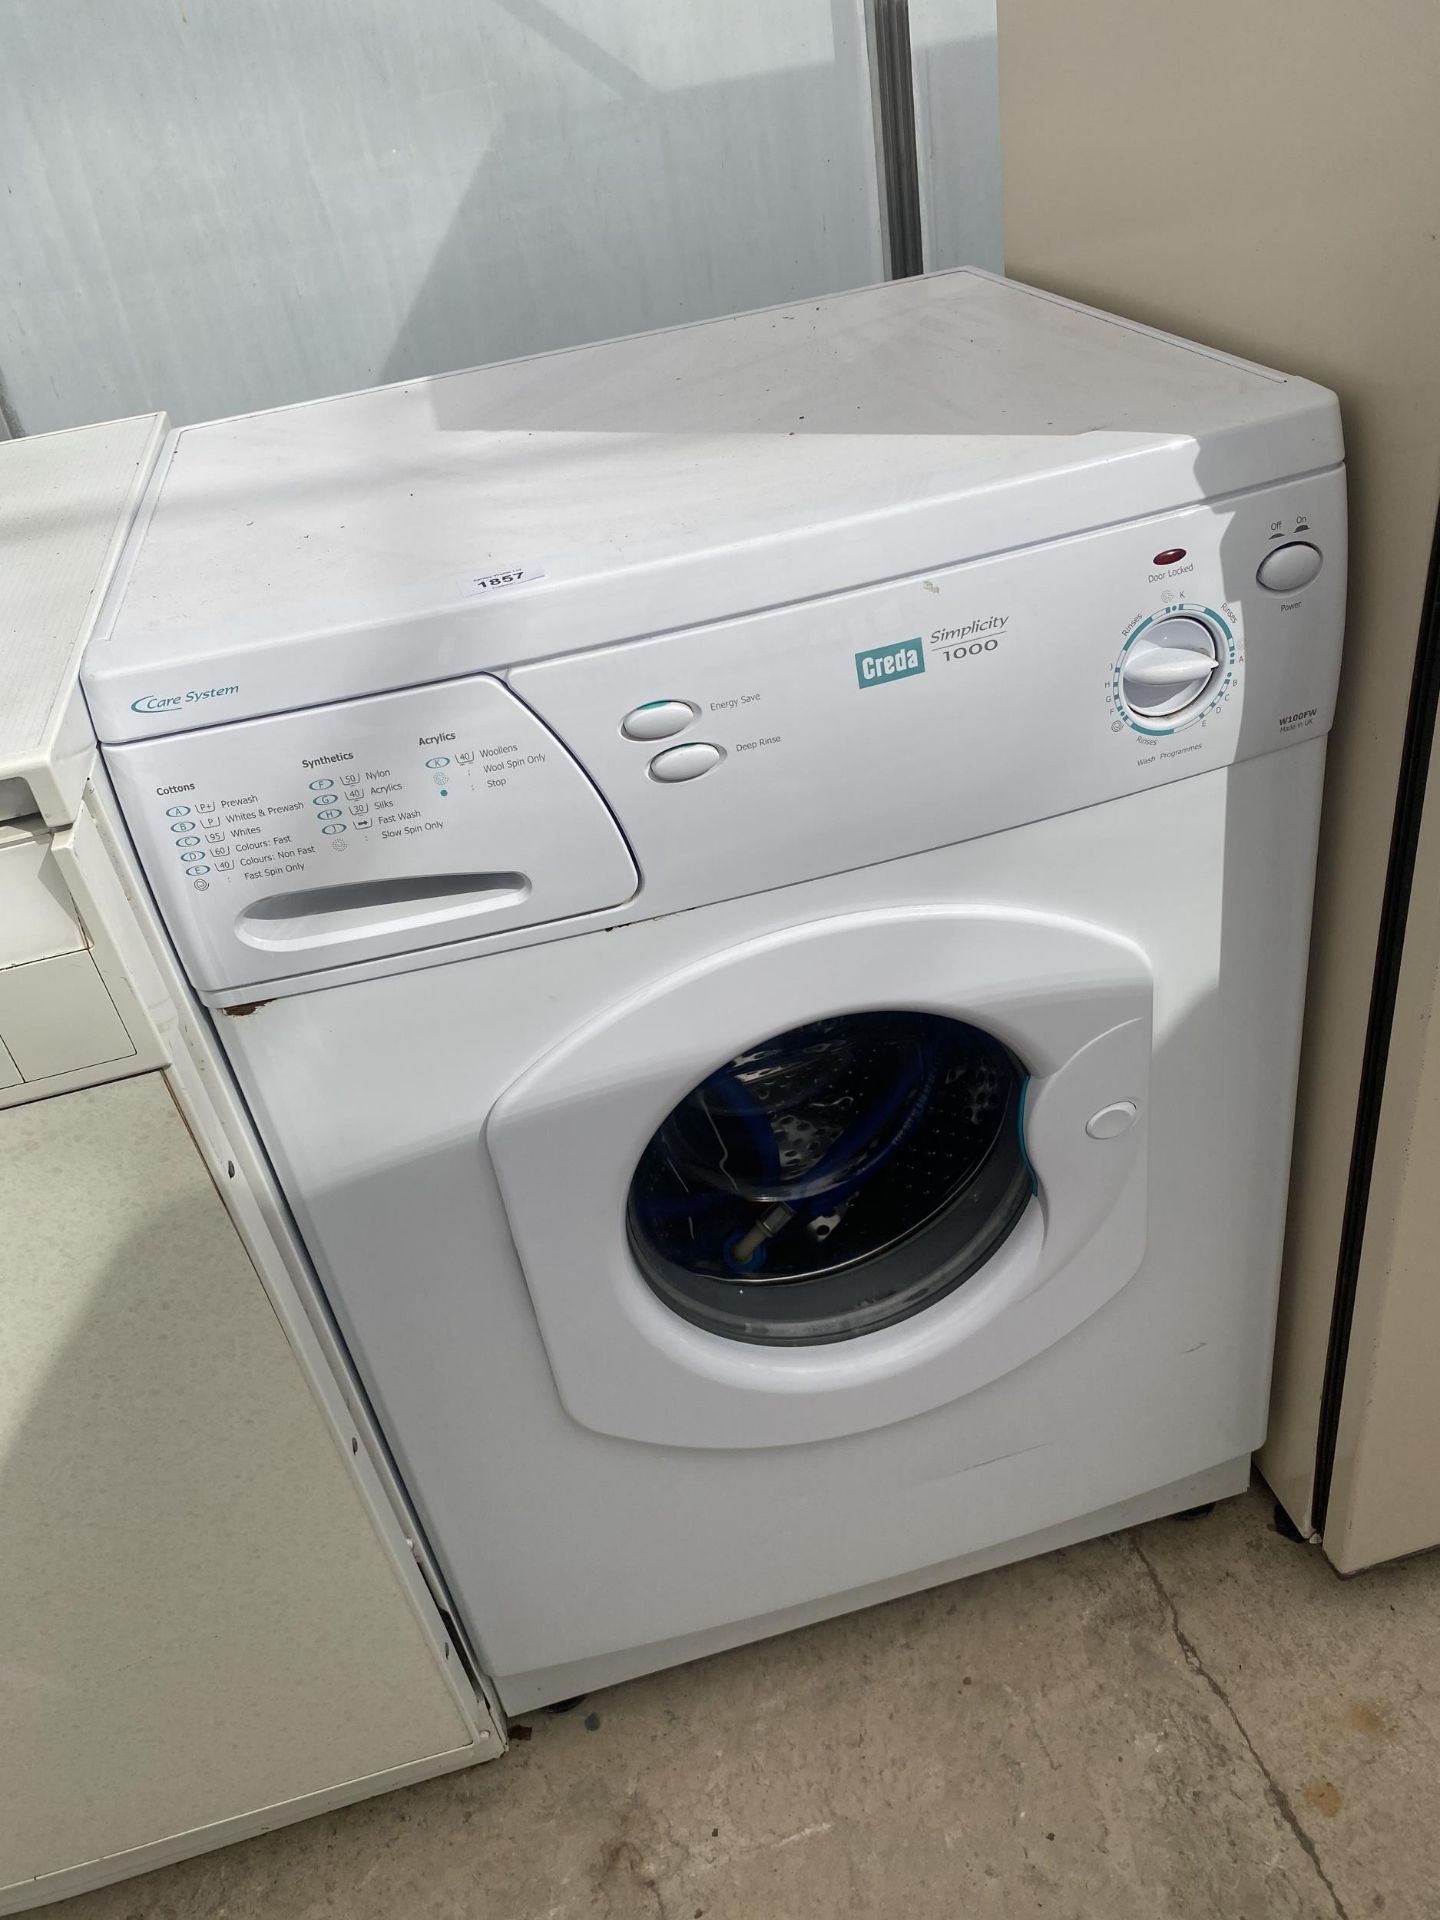 A WHITE CREDA WASHING MACHINE BELIEVED IN GOOD WORKING ORDER BUT NO WARRANTY GIVEN